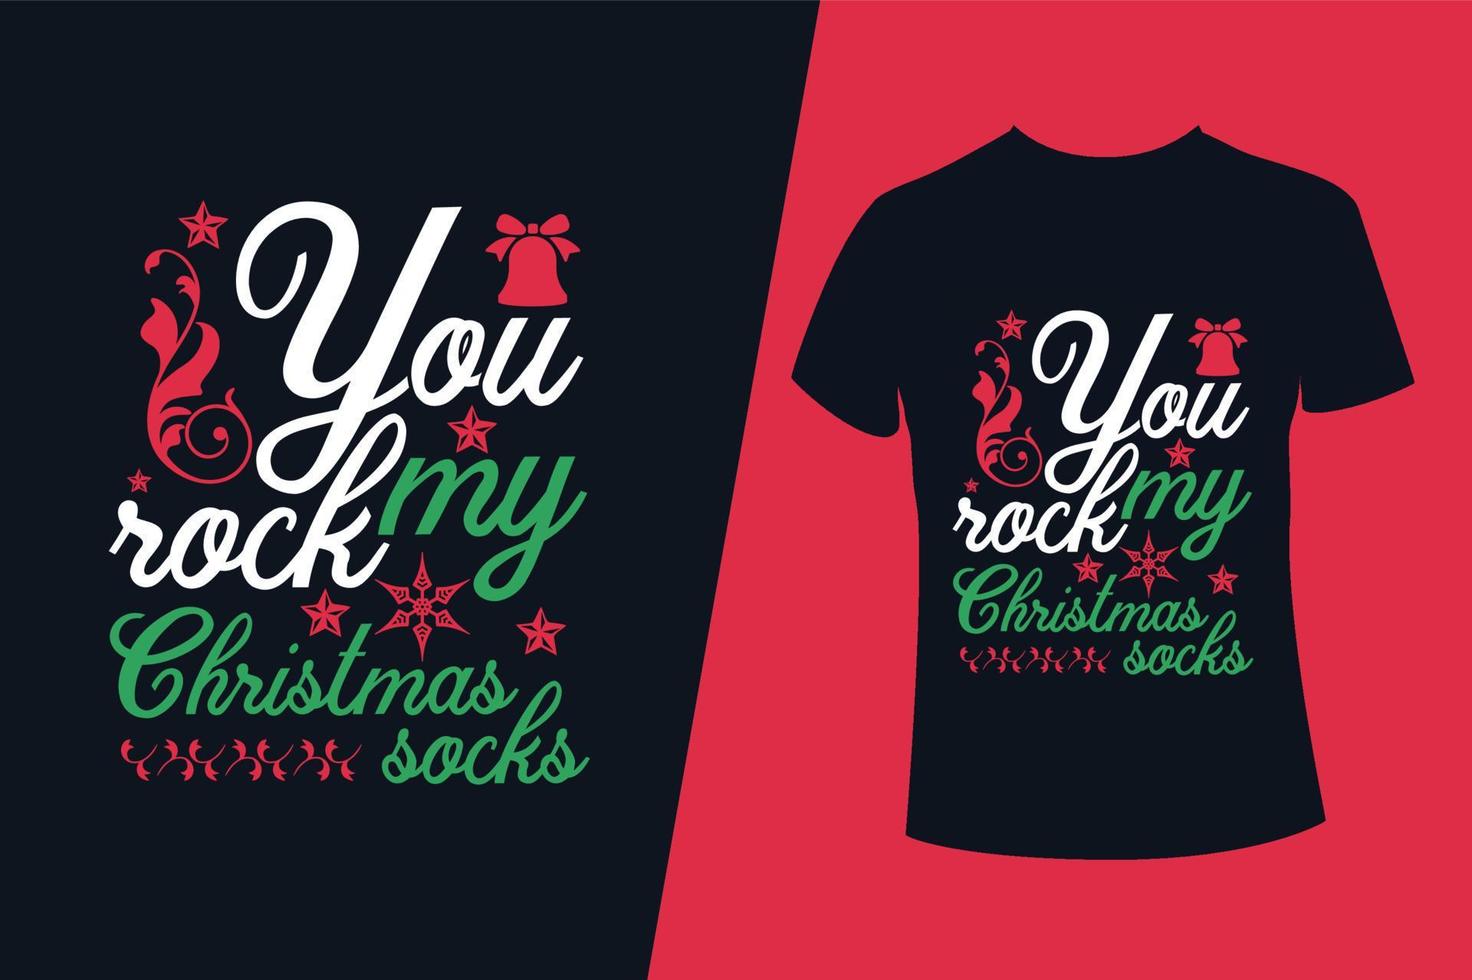 Merry Christmas T-Shirt Design Template for Christmas Celebration. Good for Greeting cards, t-shirts, mugs, and gifts. For Men, Women, and Baby clothing Free Vector